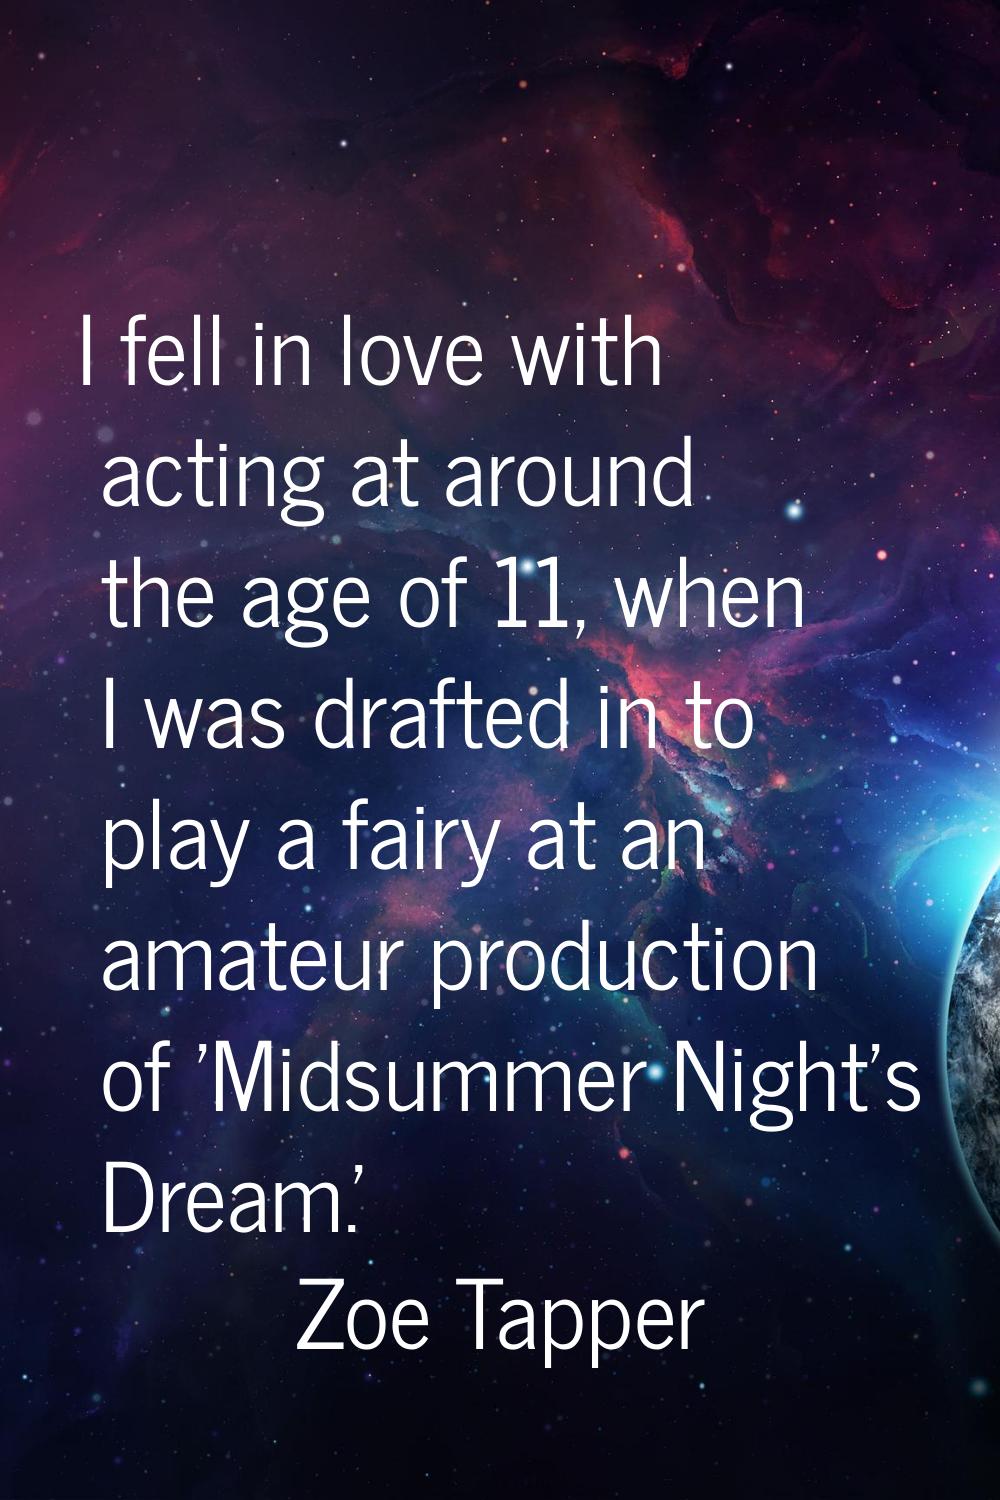 I fell in love with acting at around the age of 11, when I was drafted in to play a fairy at an ama